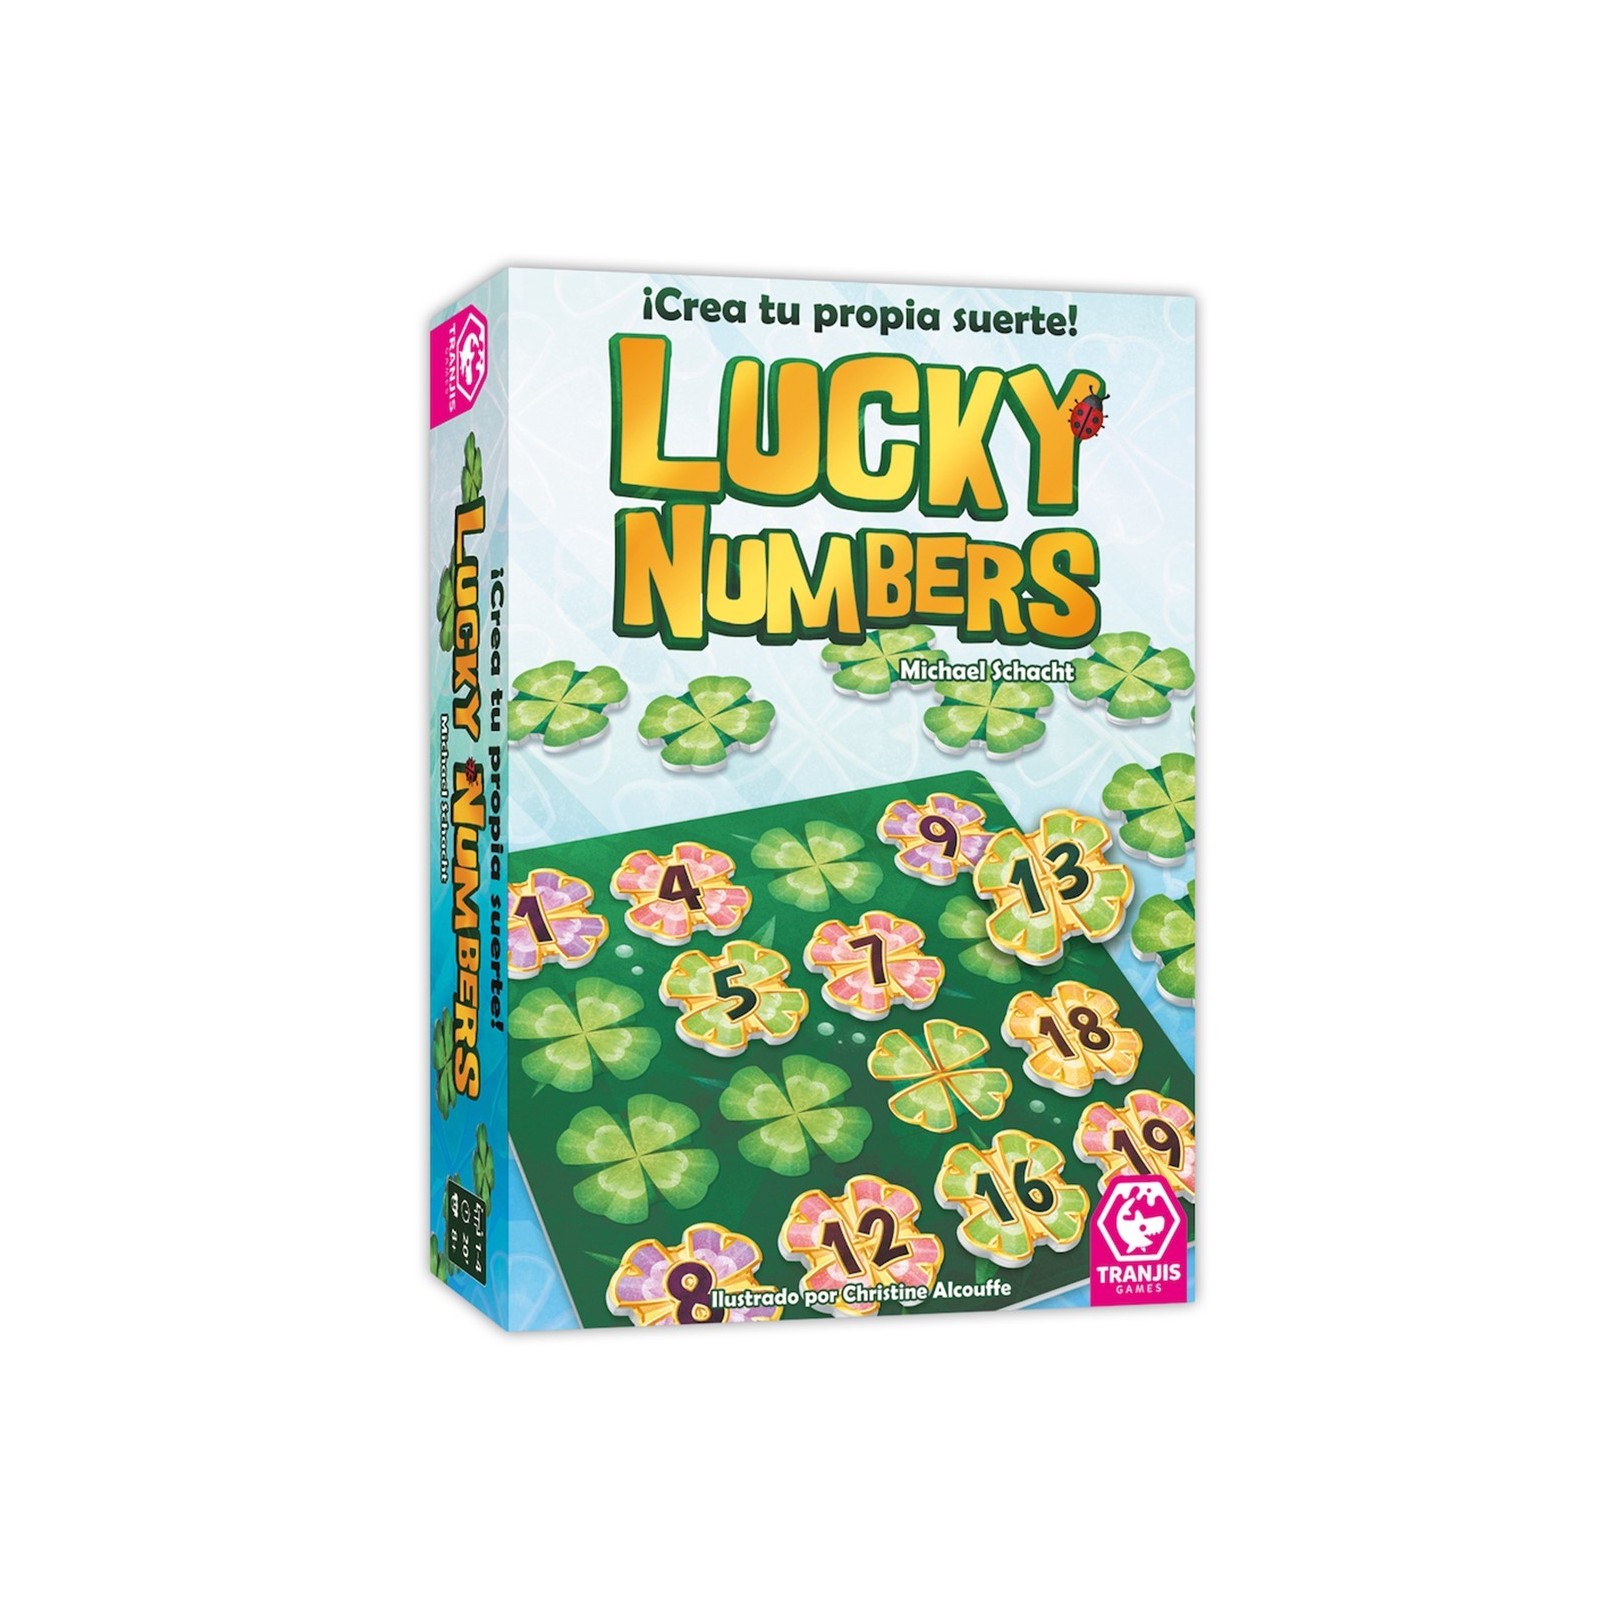 Juego mesa lucky numbers